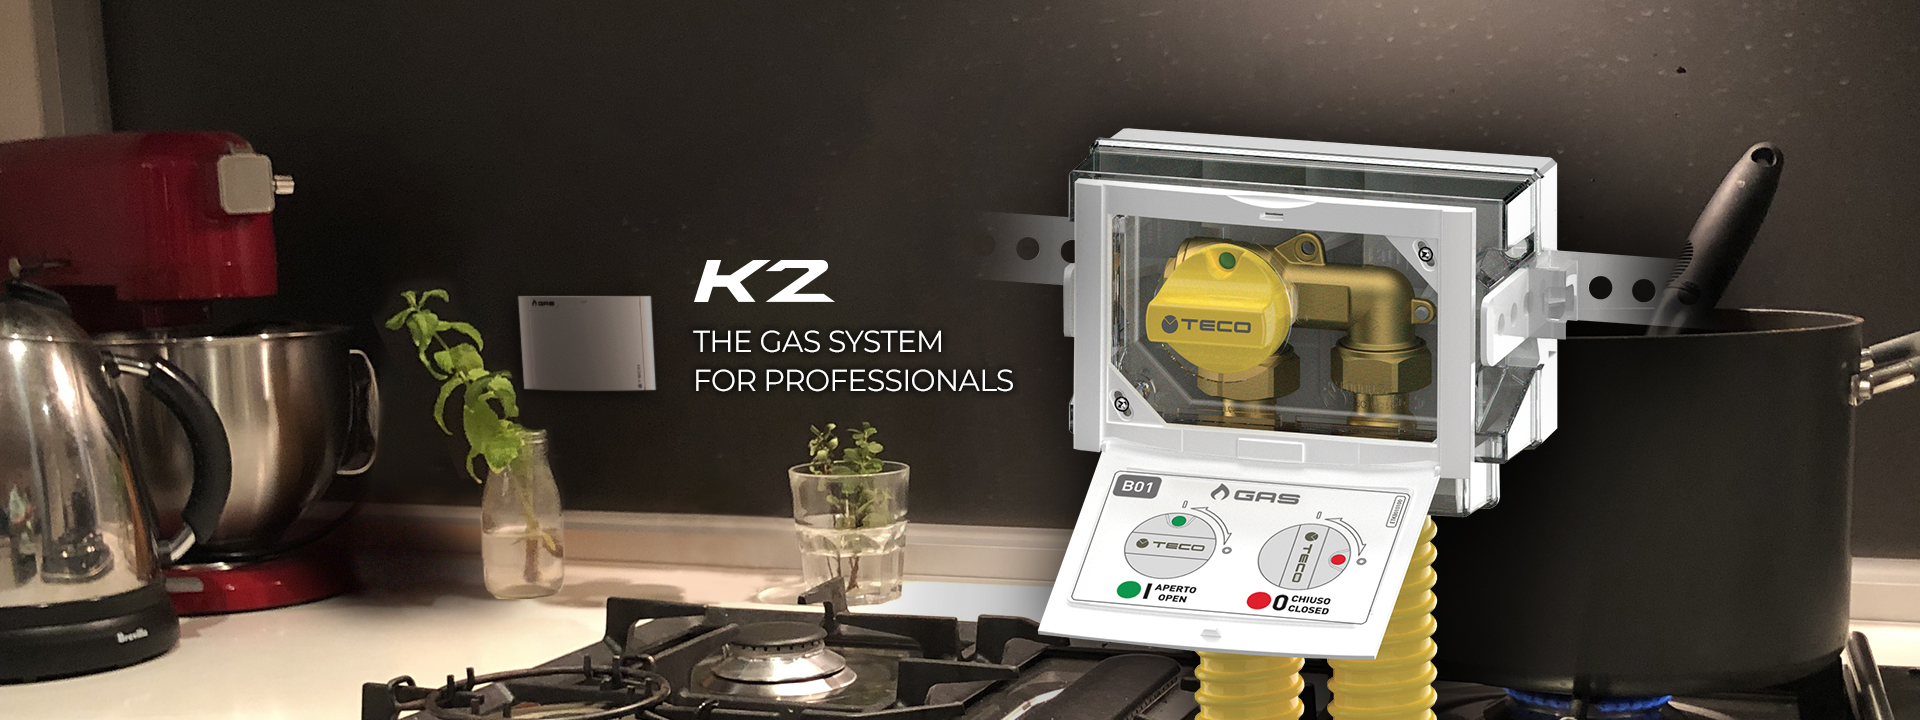 Teco K2: the gas system for professionals